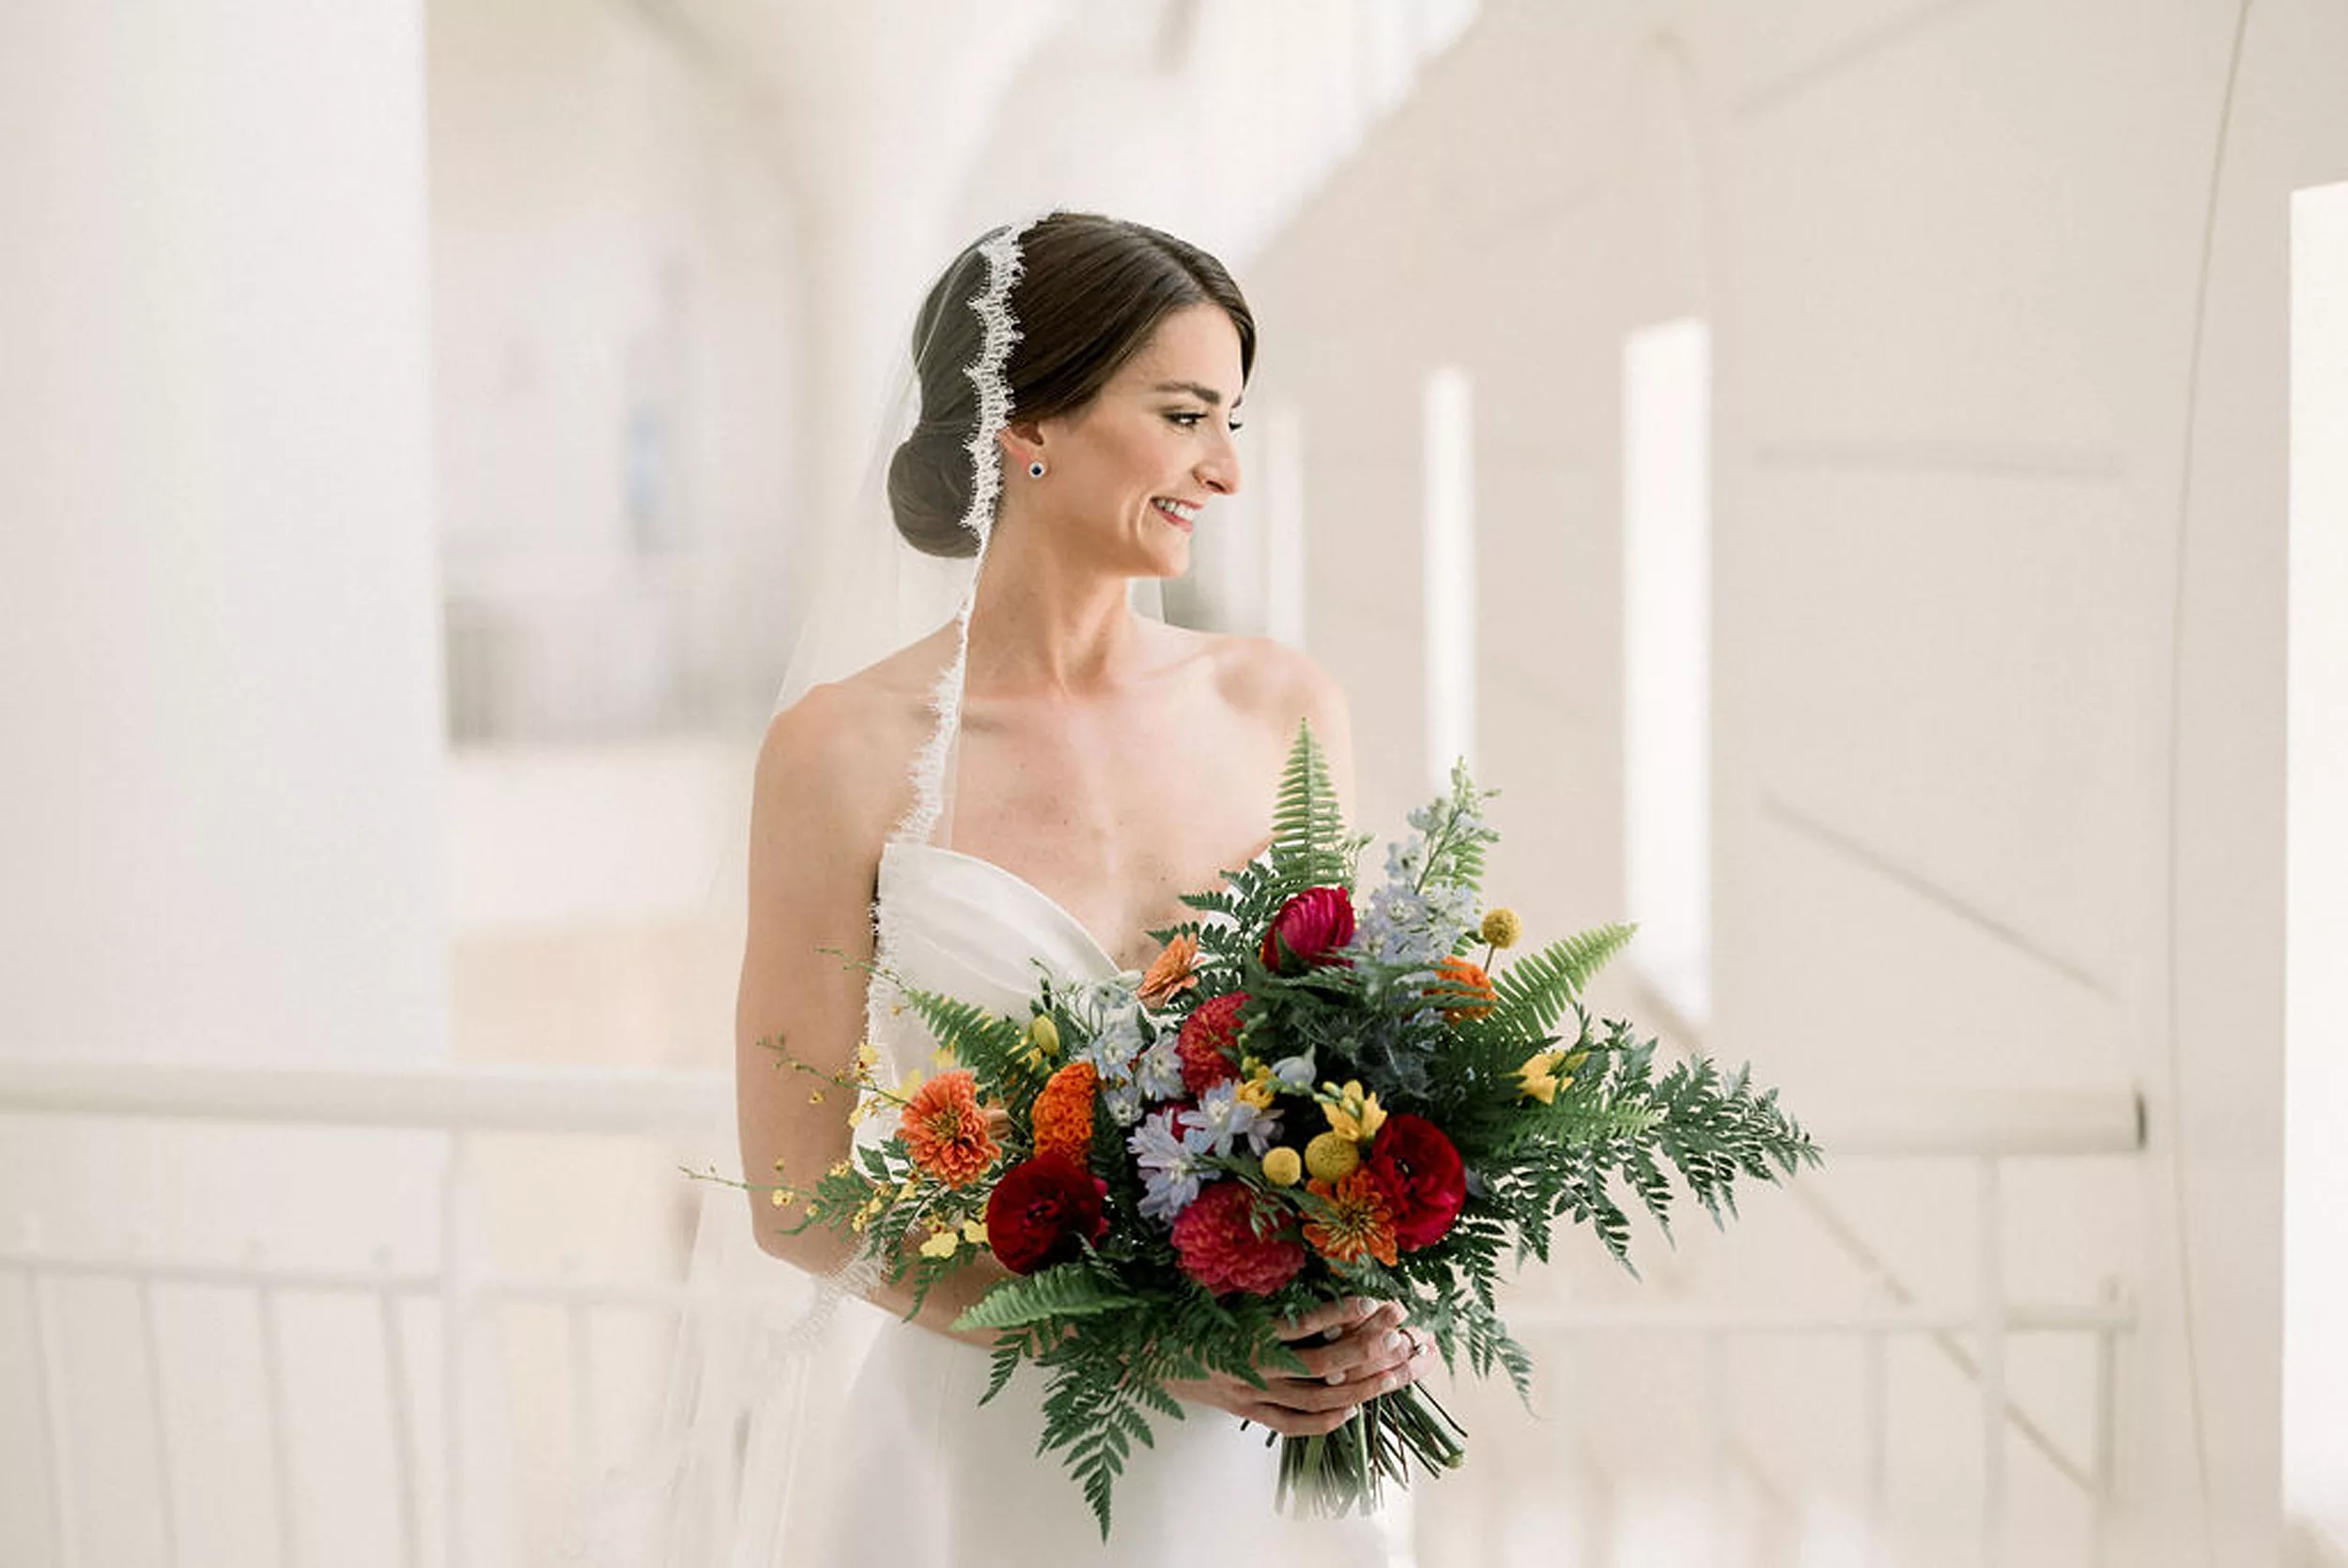 A bride stands looking out a window holding her fern and colorful flower bouquet and lace veil